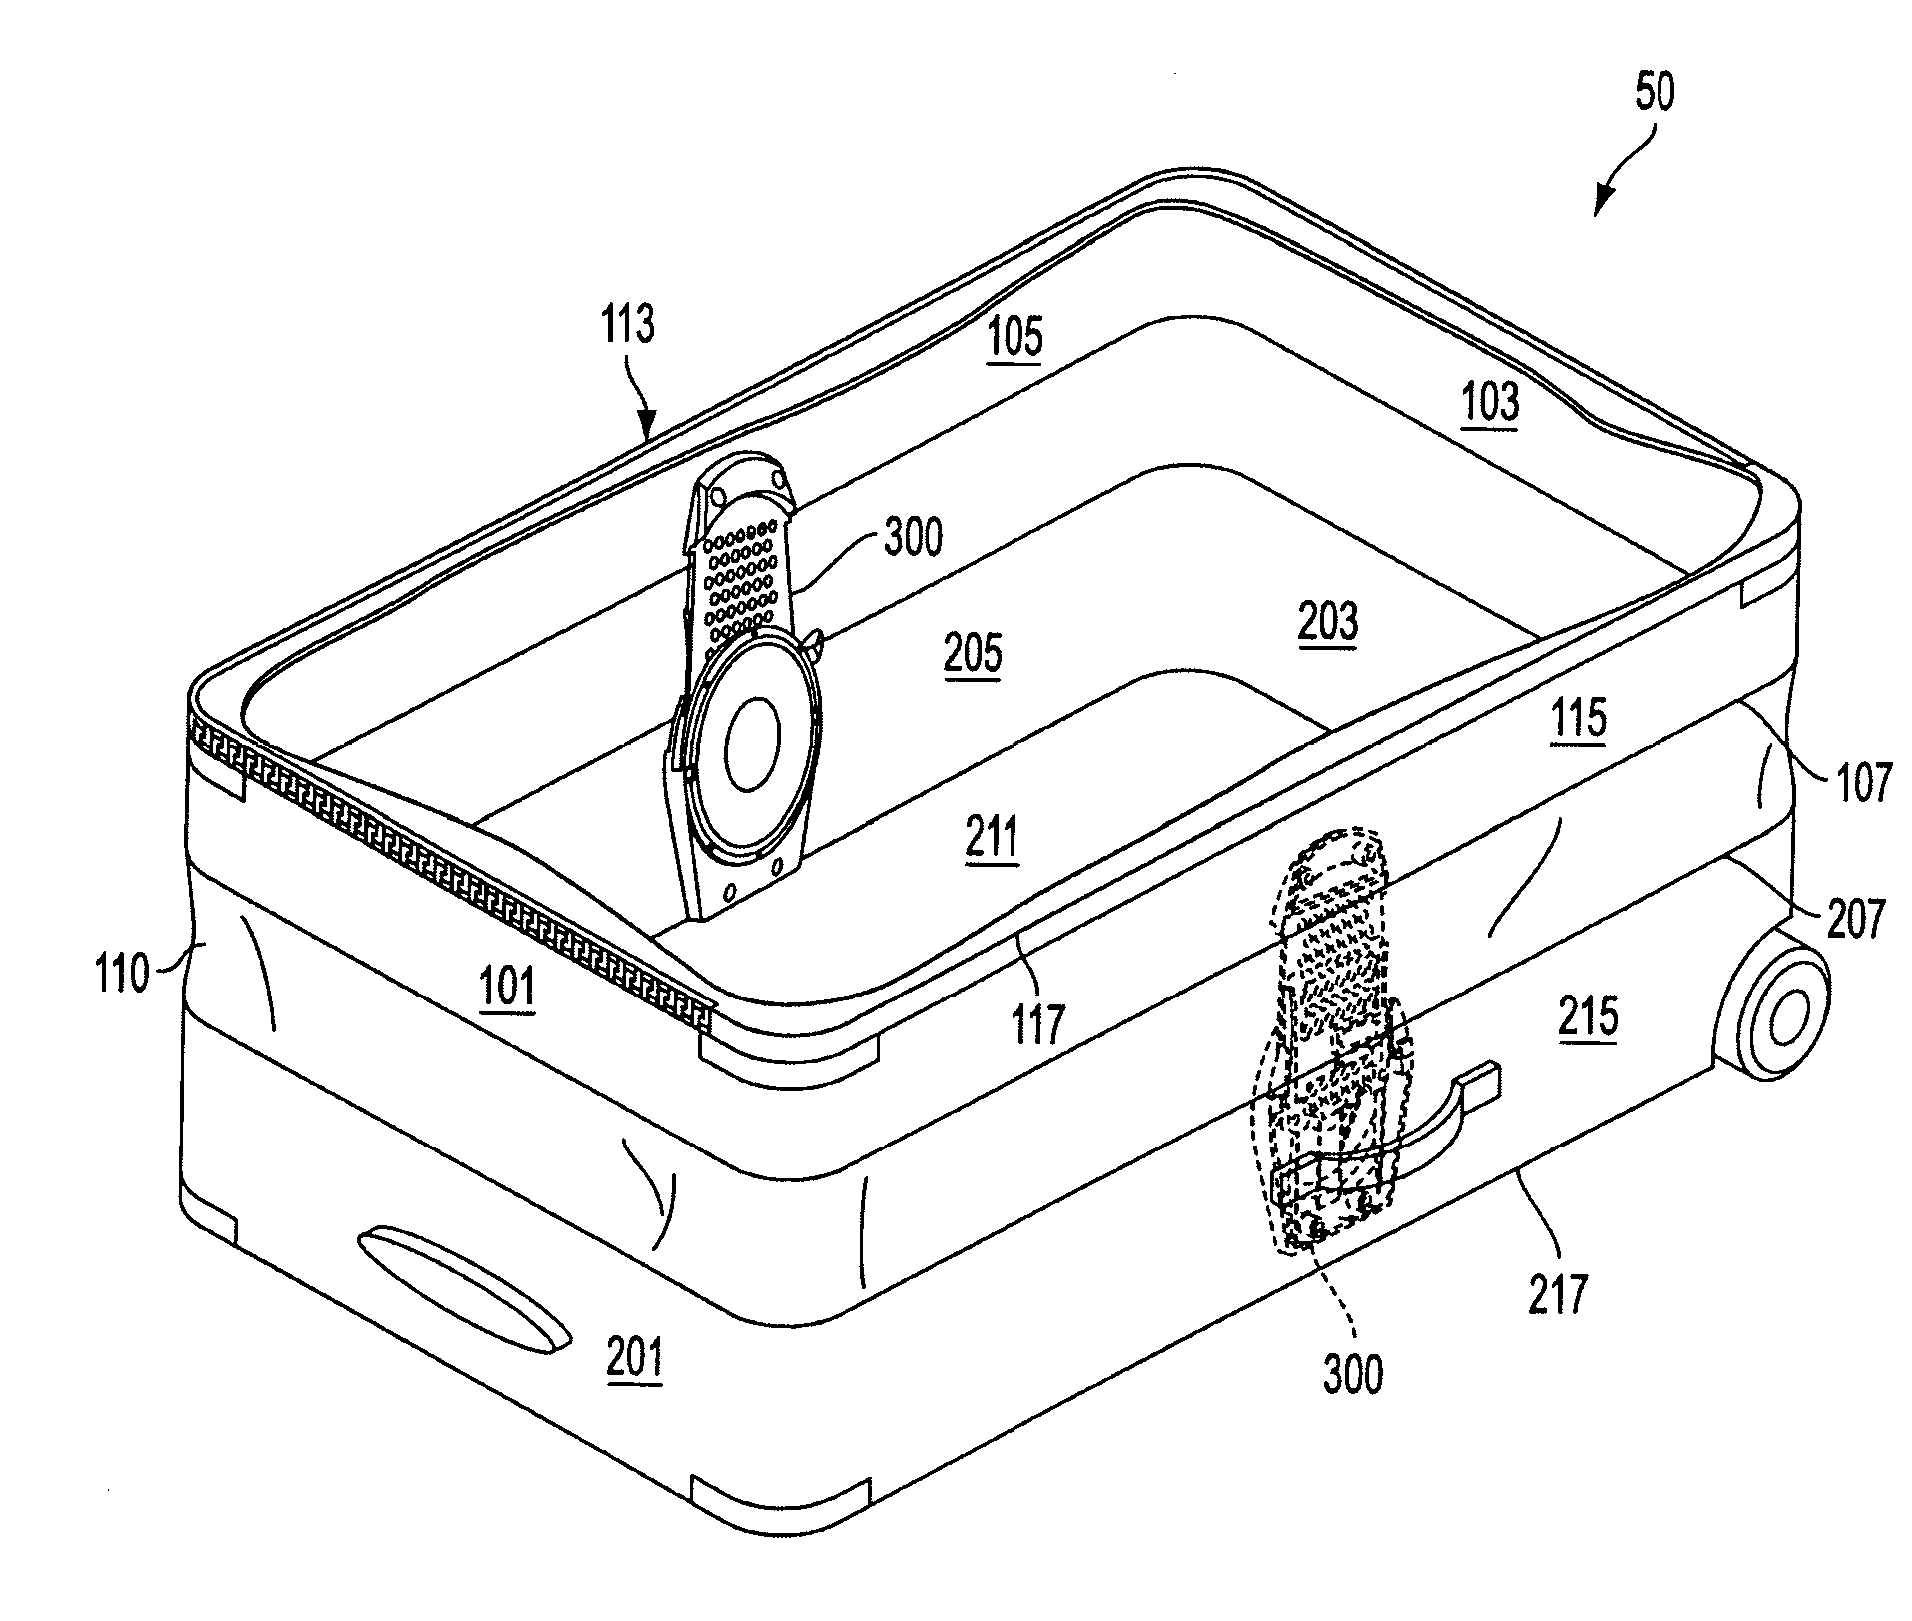 Expandable luggage and expansion mechanism